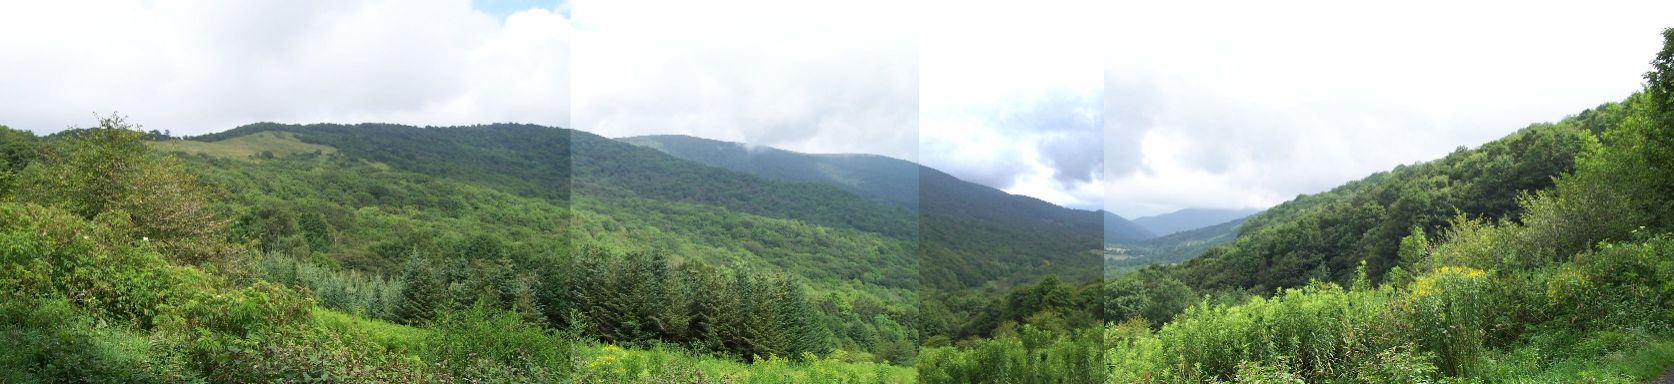 View from Overmountain Shelter